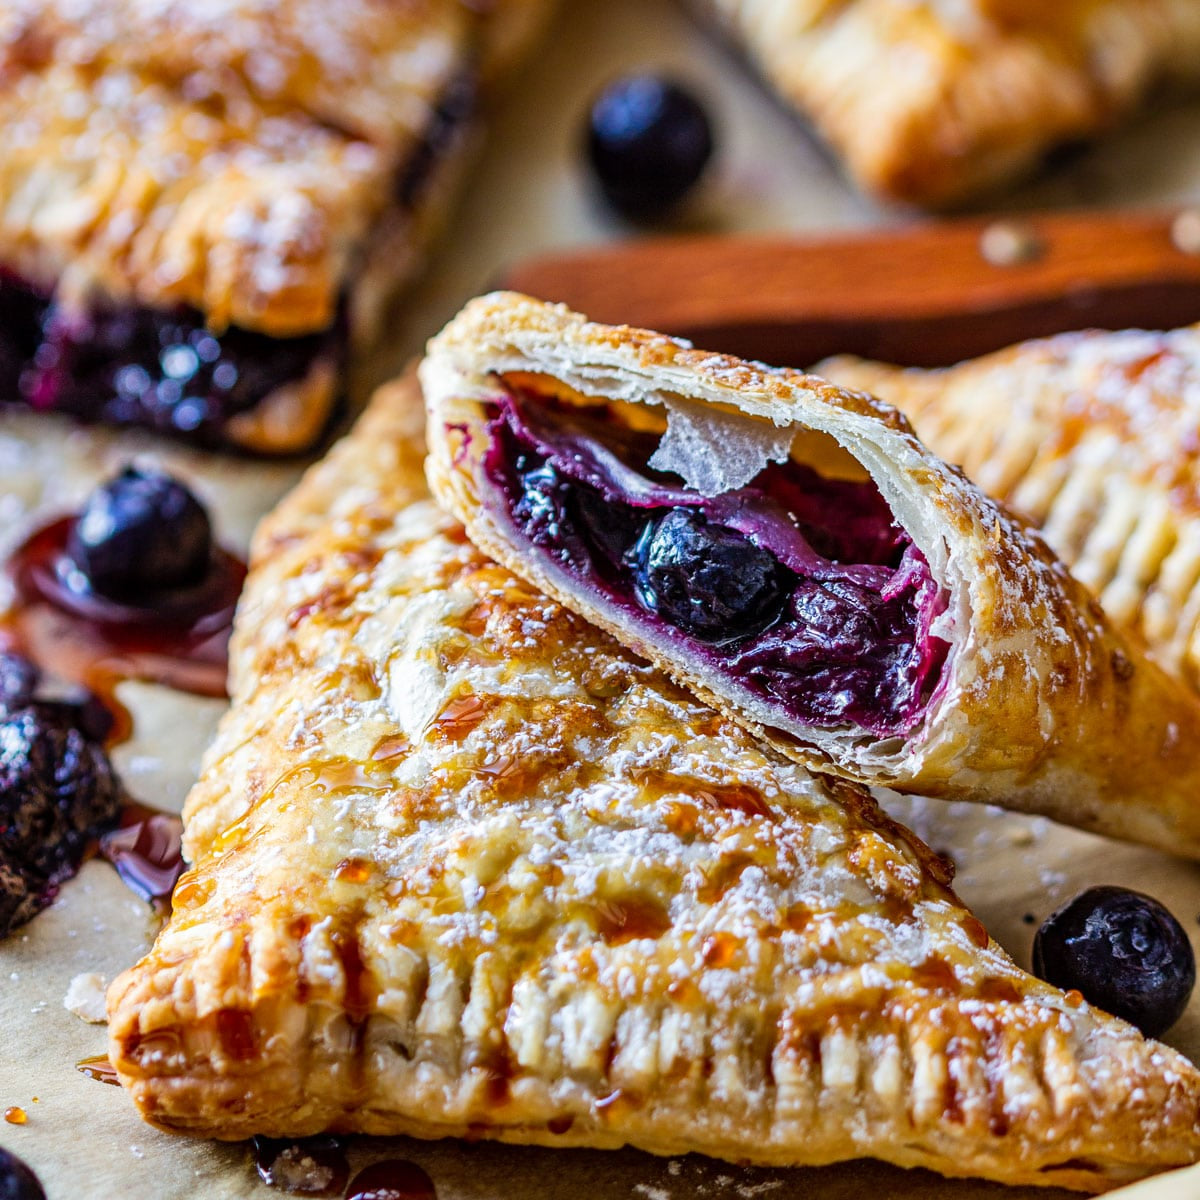 Blueberry Turnover 6ct bag Thaw Bake @375 for 25-30 min